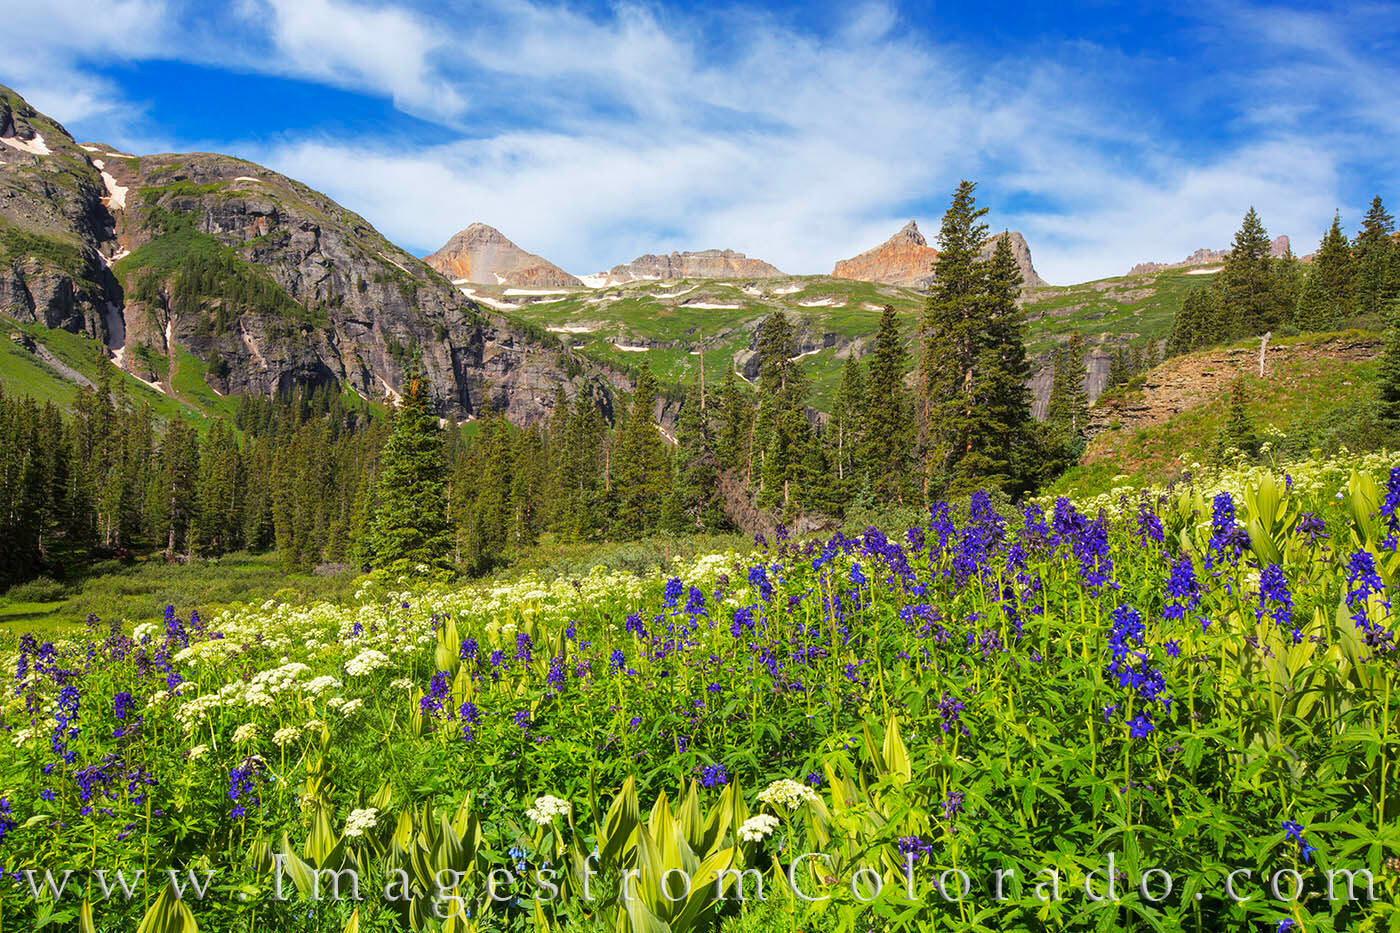 Lupine fill the meadows in the Ice Lakes Trail basin. In the distance, four 13,000’ peaks rise into the cool morning air, including...